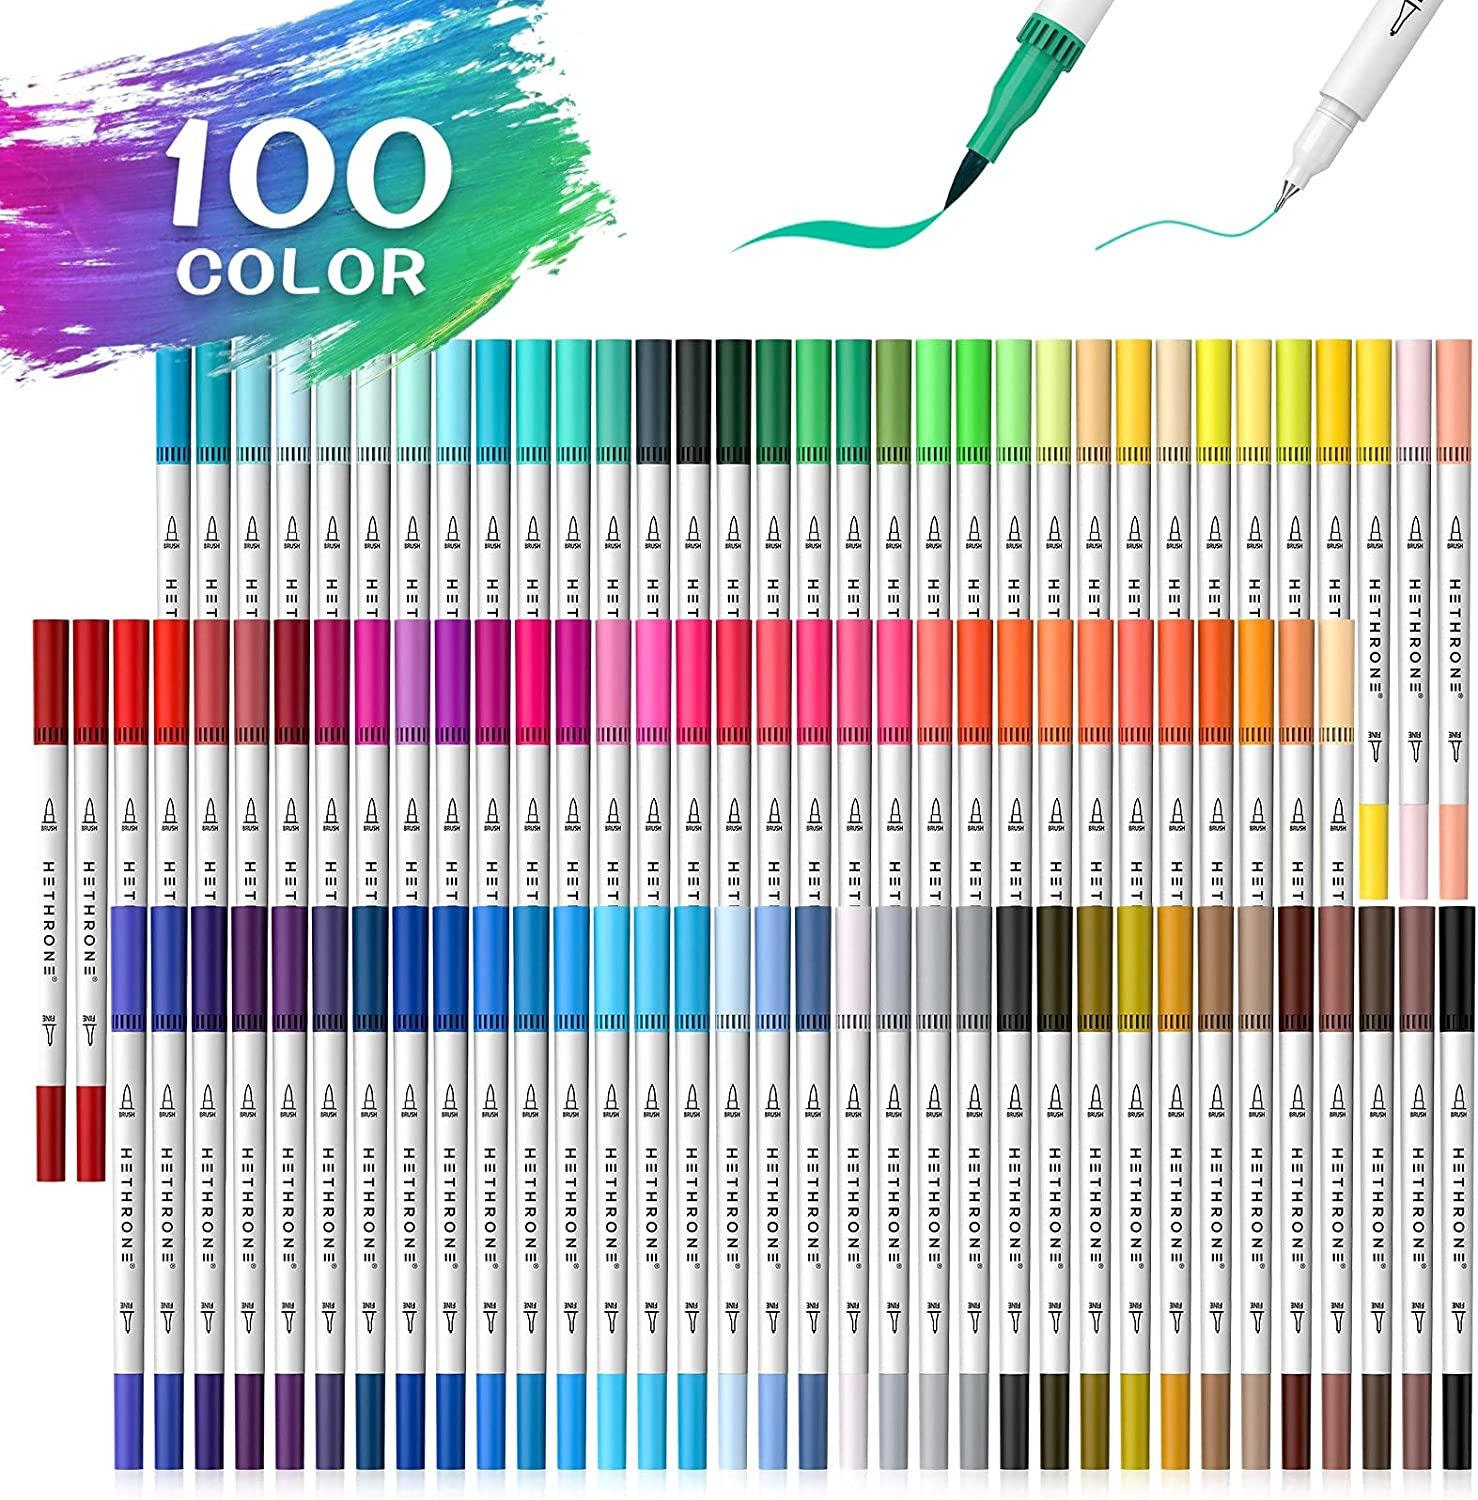 Hethrone 100 Colors Dual Brush Pens Colored Markers With 0.4mm